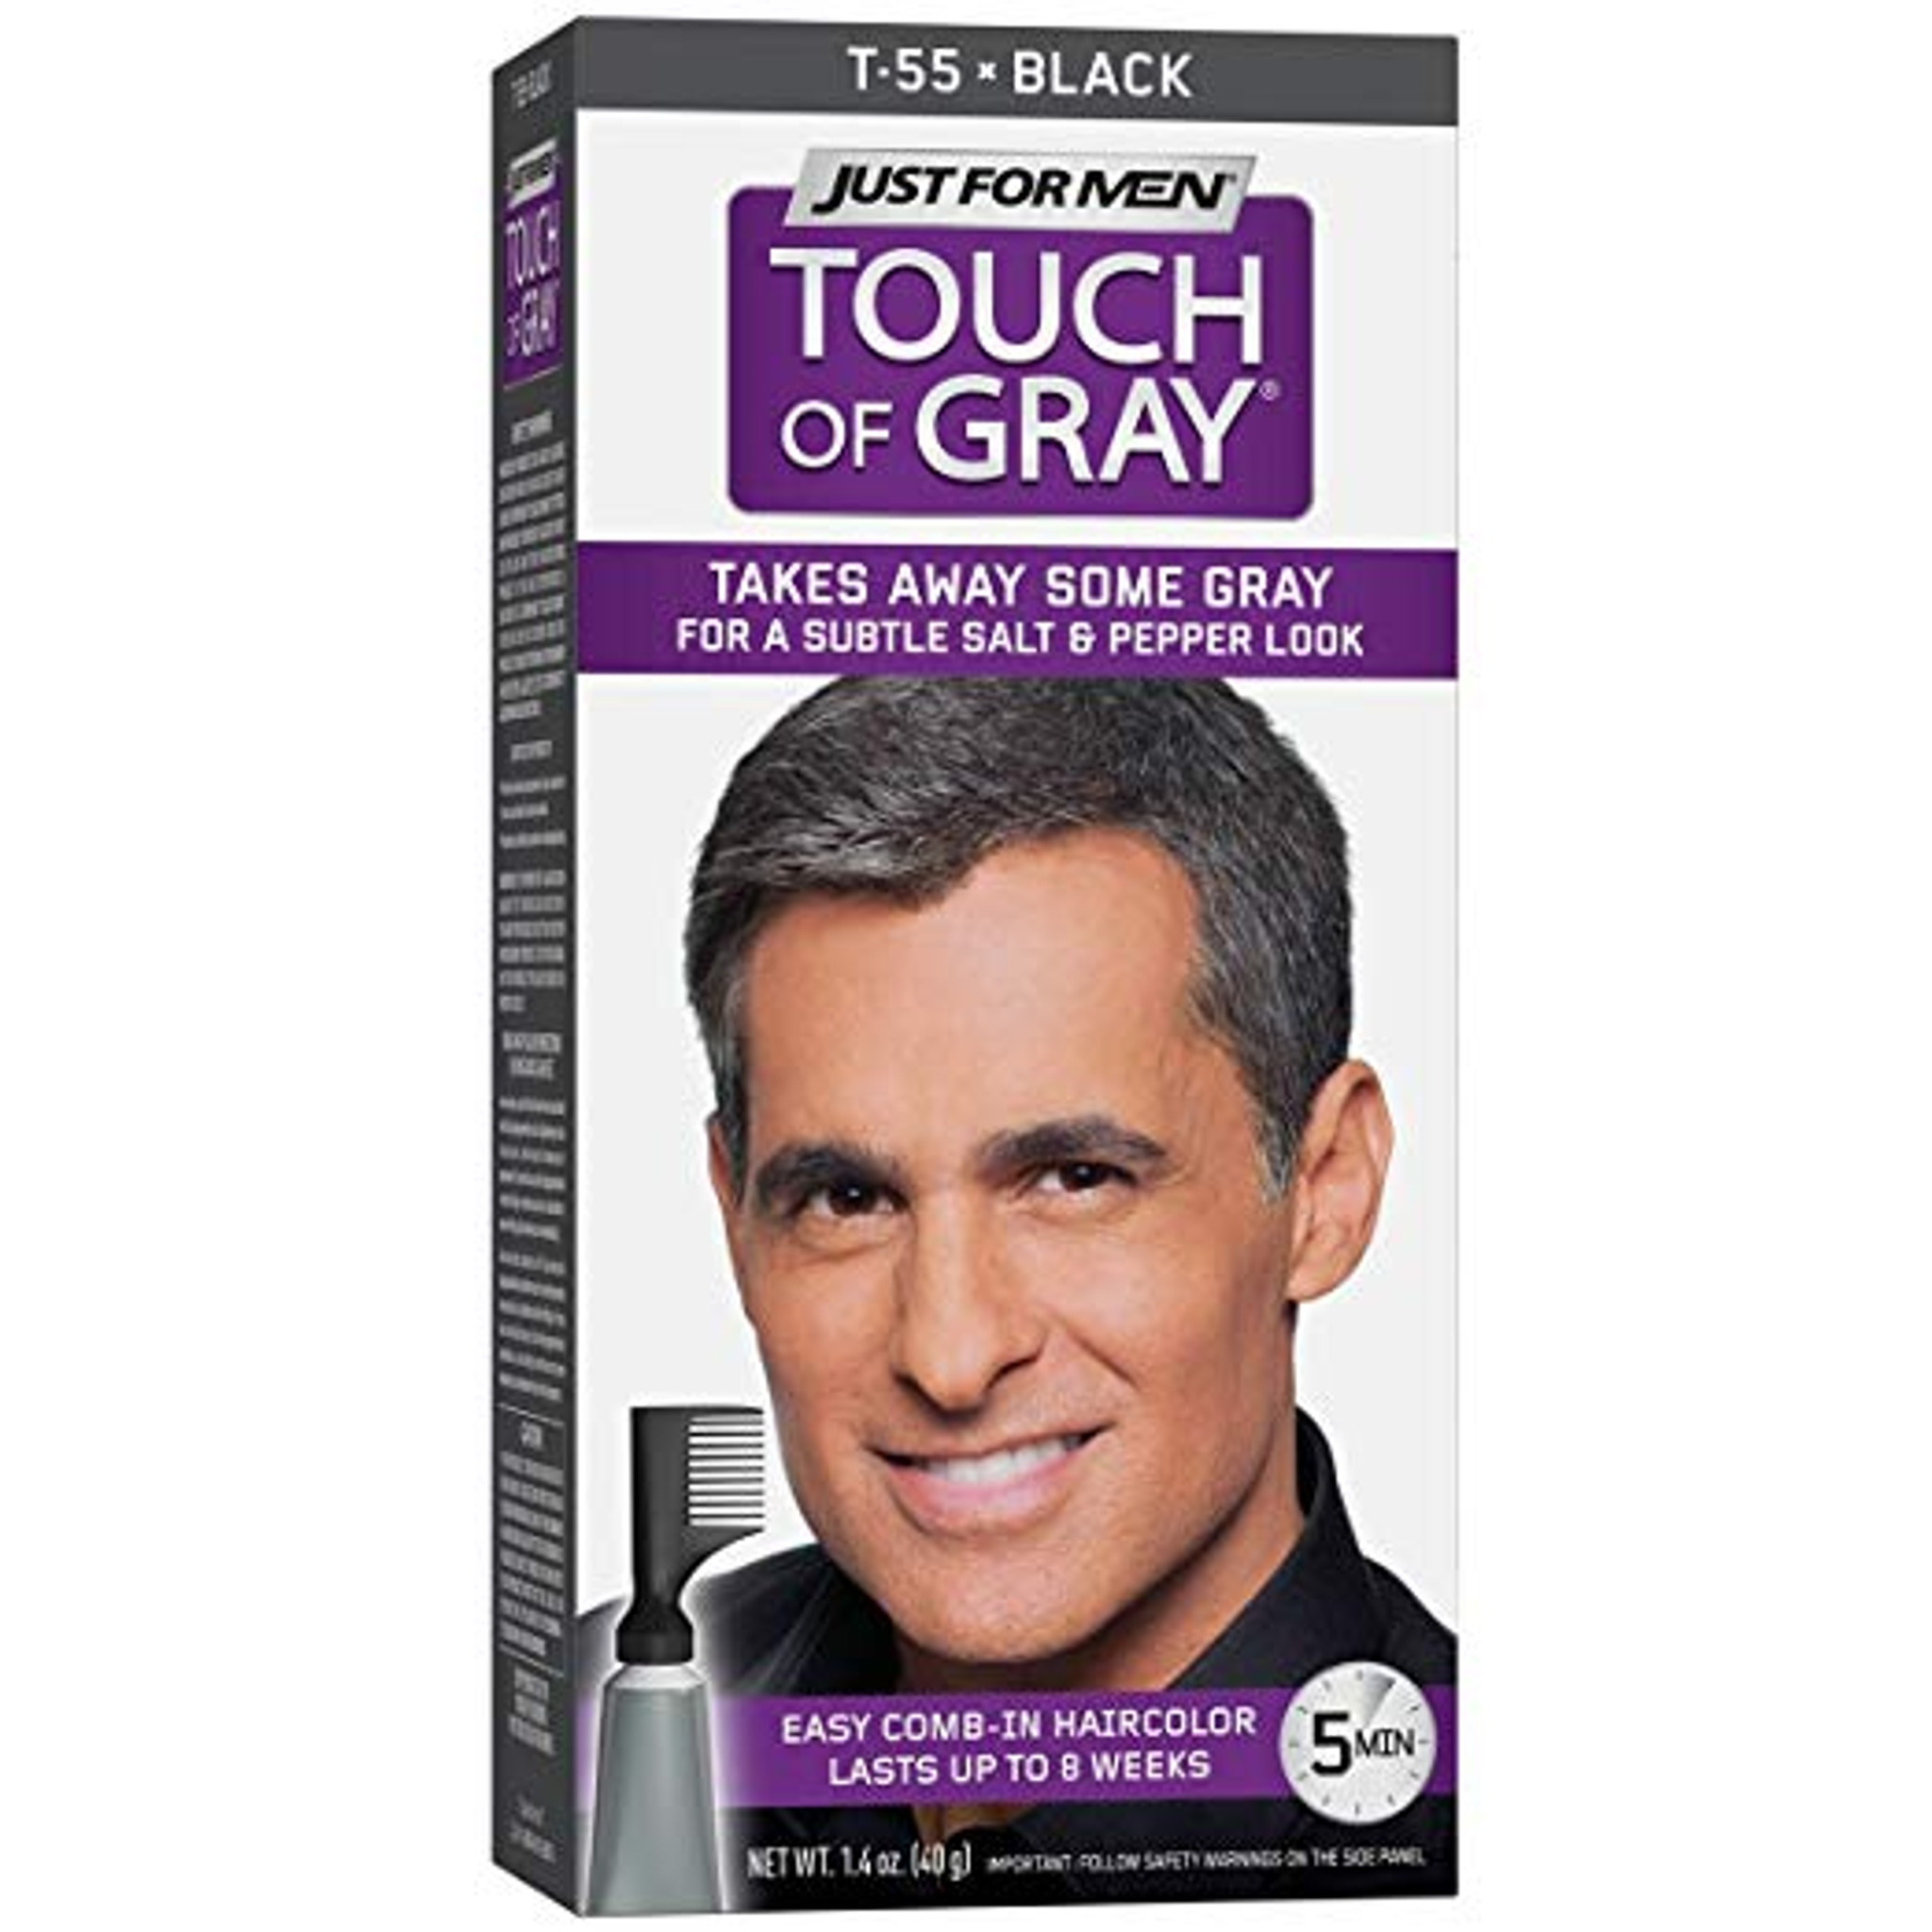 Just For Men Touch Of Gray Comb-In Men's Hair Color Black -  